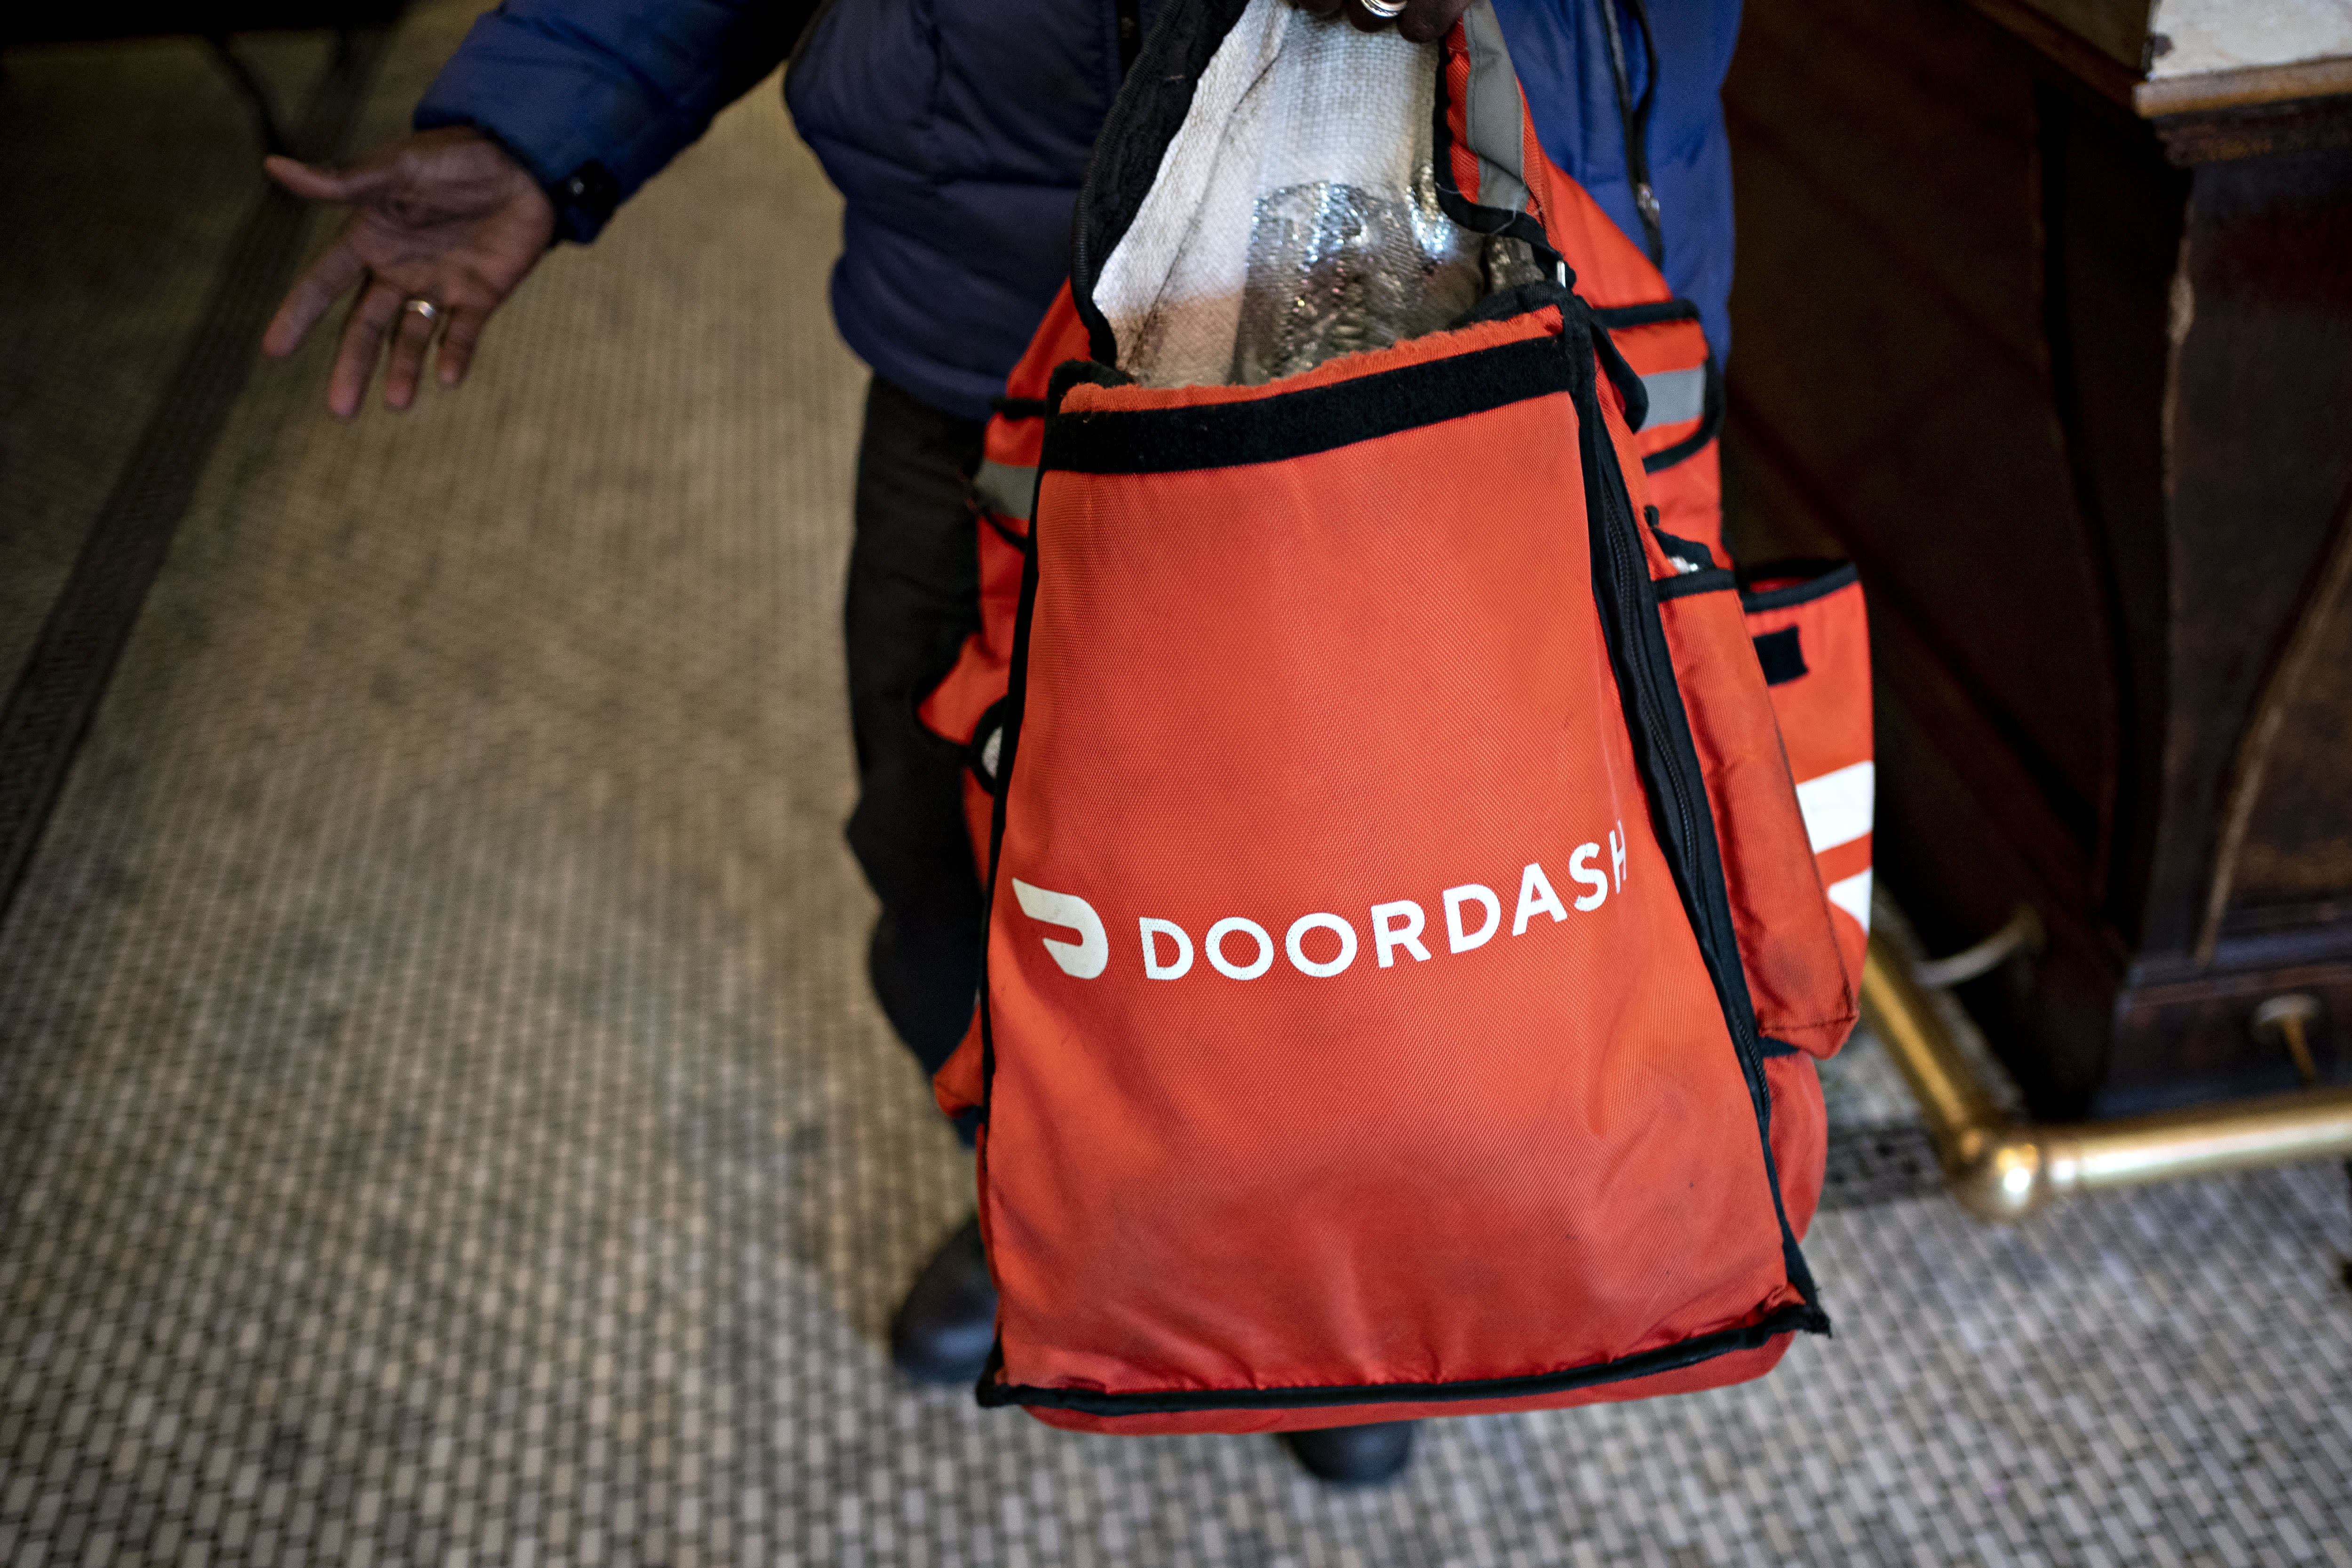 DoorDash accuses software company Olo violating a contract by charging it too much - CNBC